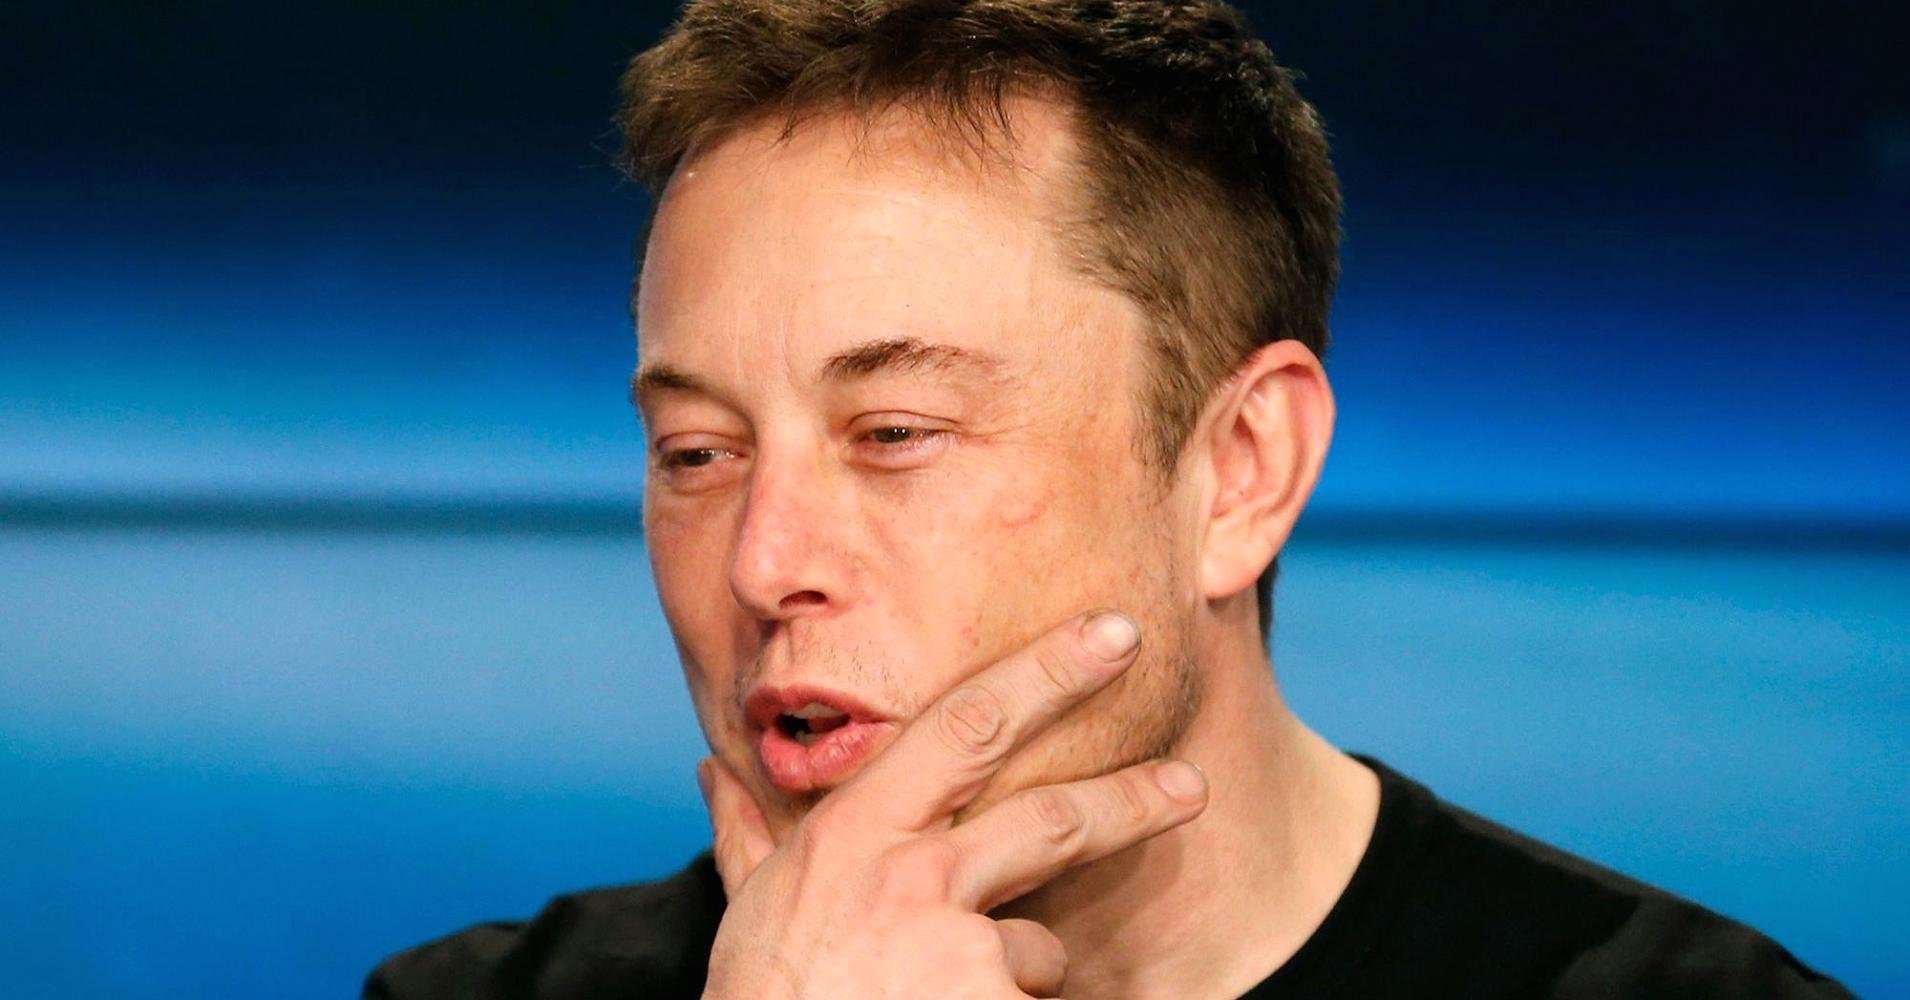 image for Elon Musk admits humans are sometimes superior to robots, in a tweet about Tesla delays